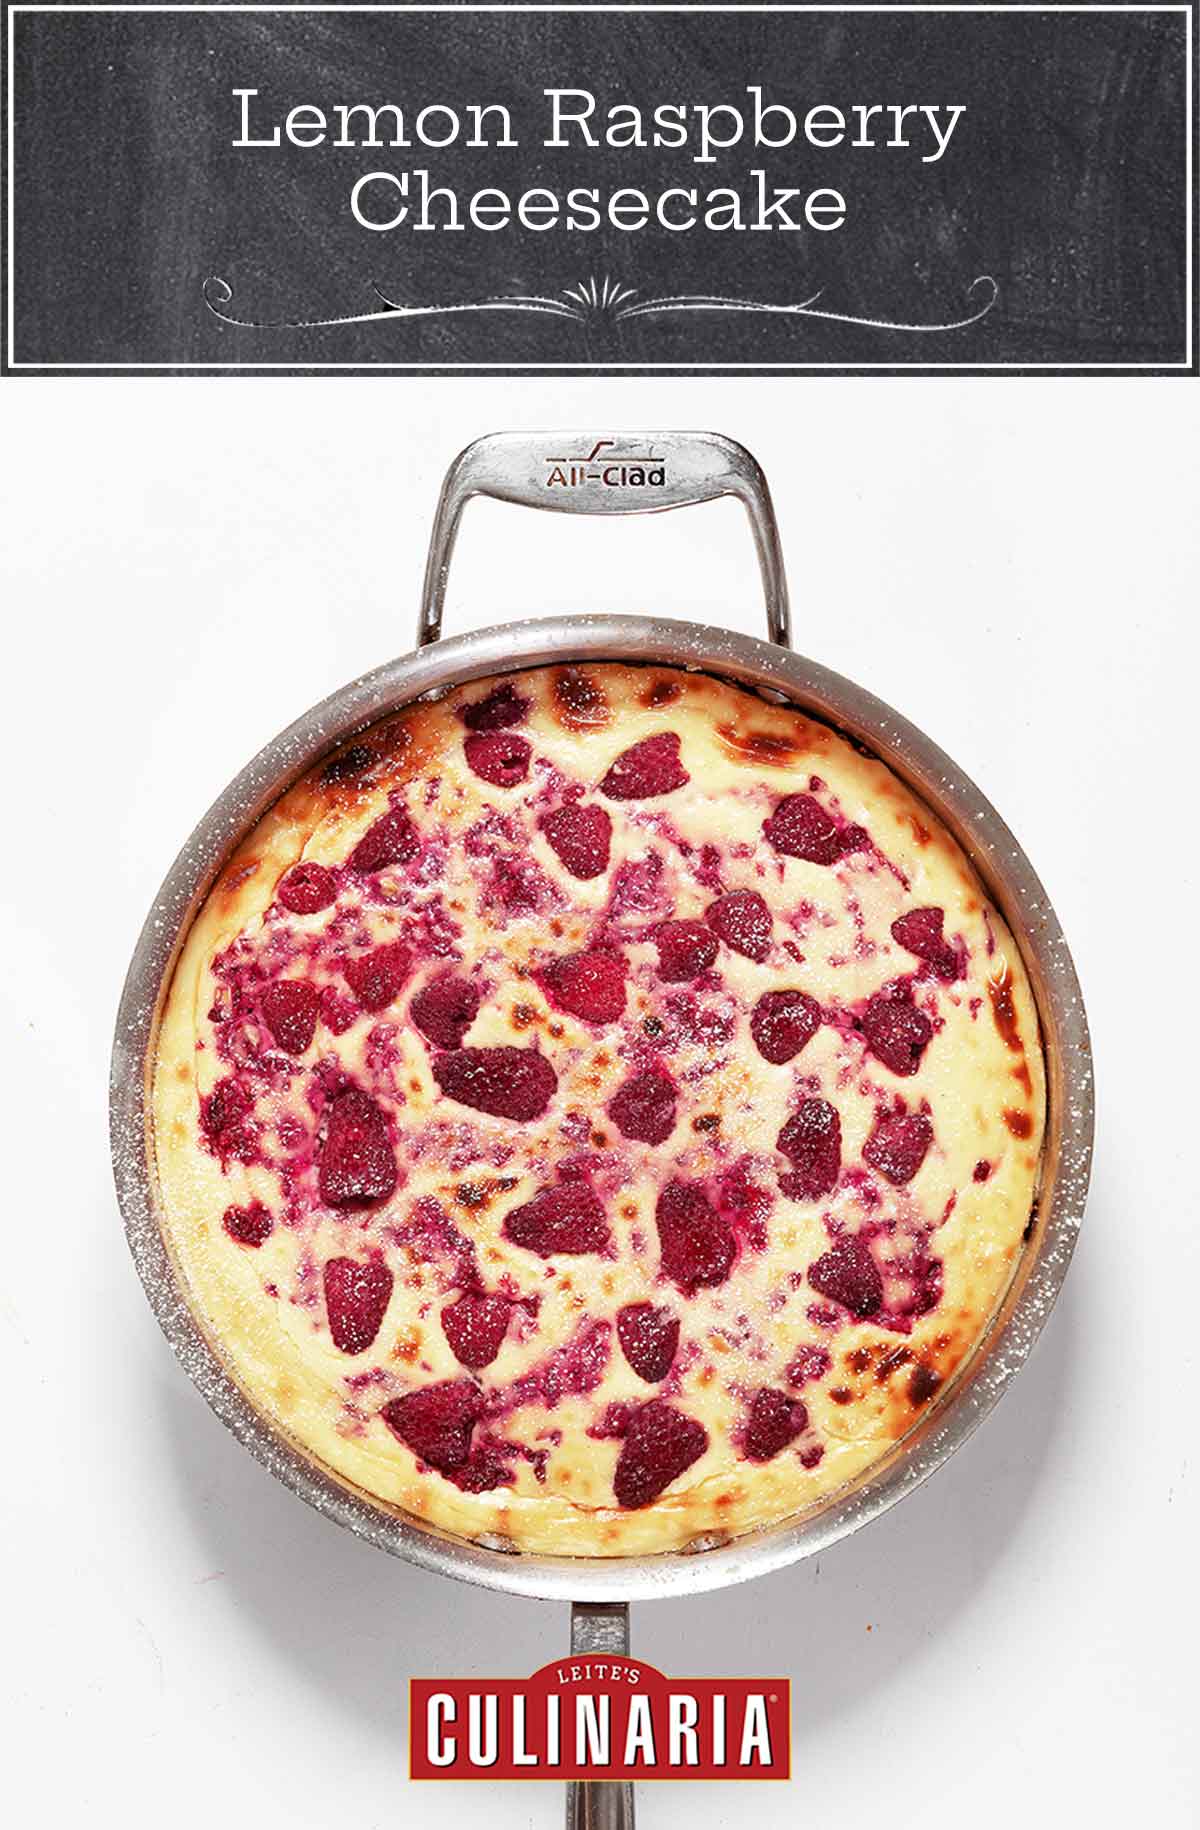 A baked lemon raspberry cheesecake topped with raspberries in a metal skillet.